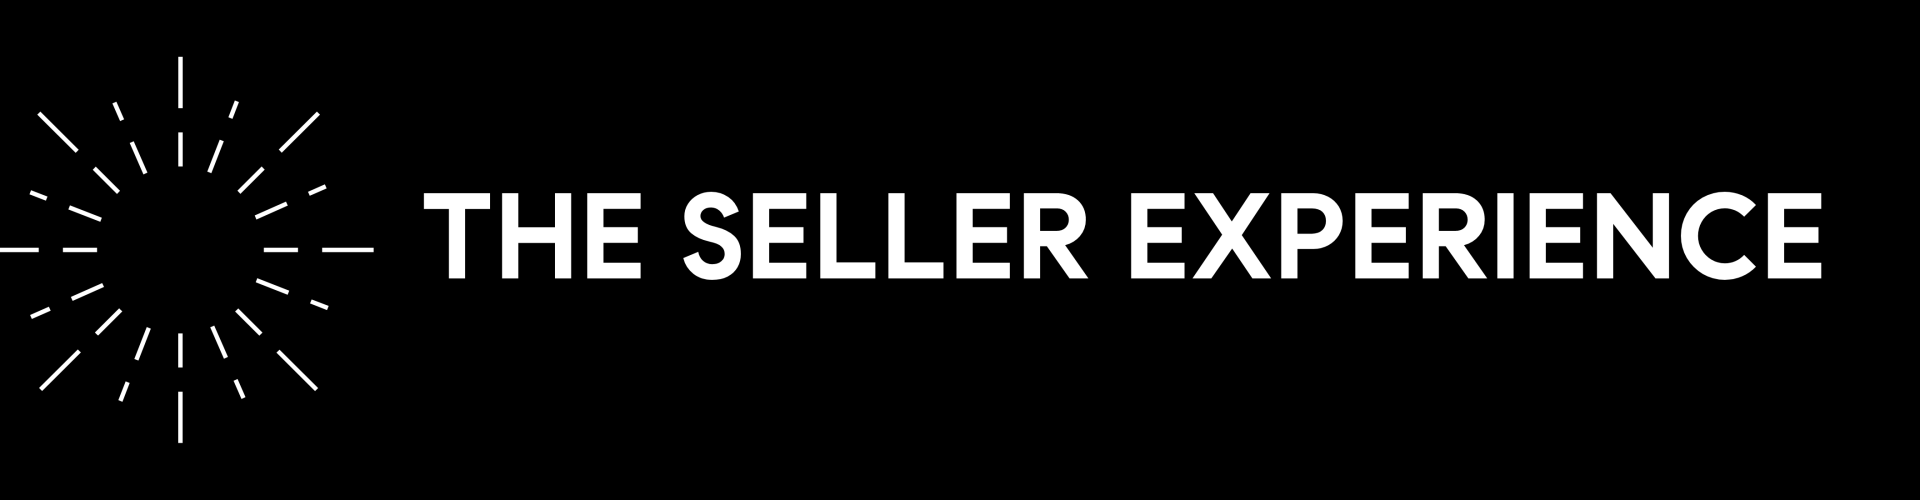 THE SELLER EXPERIENCE